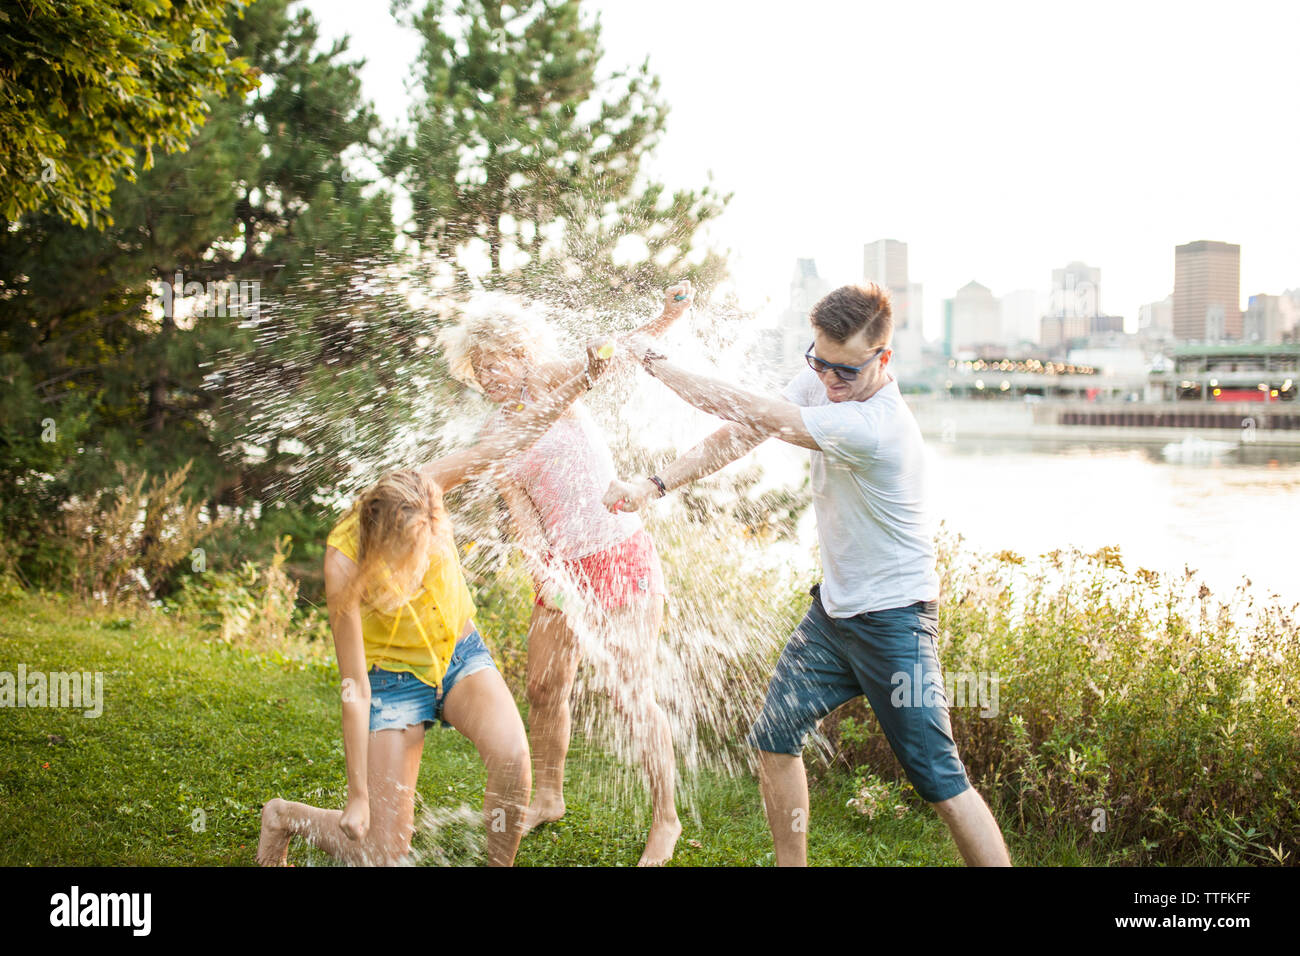 Friends throwing water balloons at eachother laughing hysterically Stock Photo